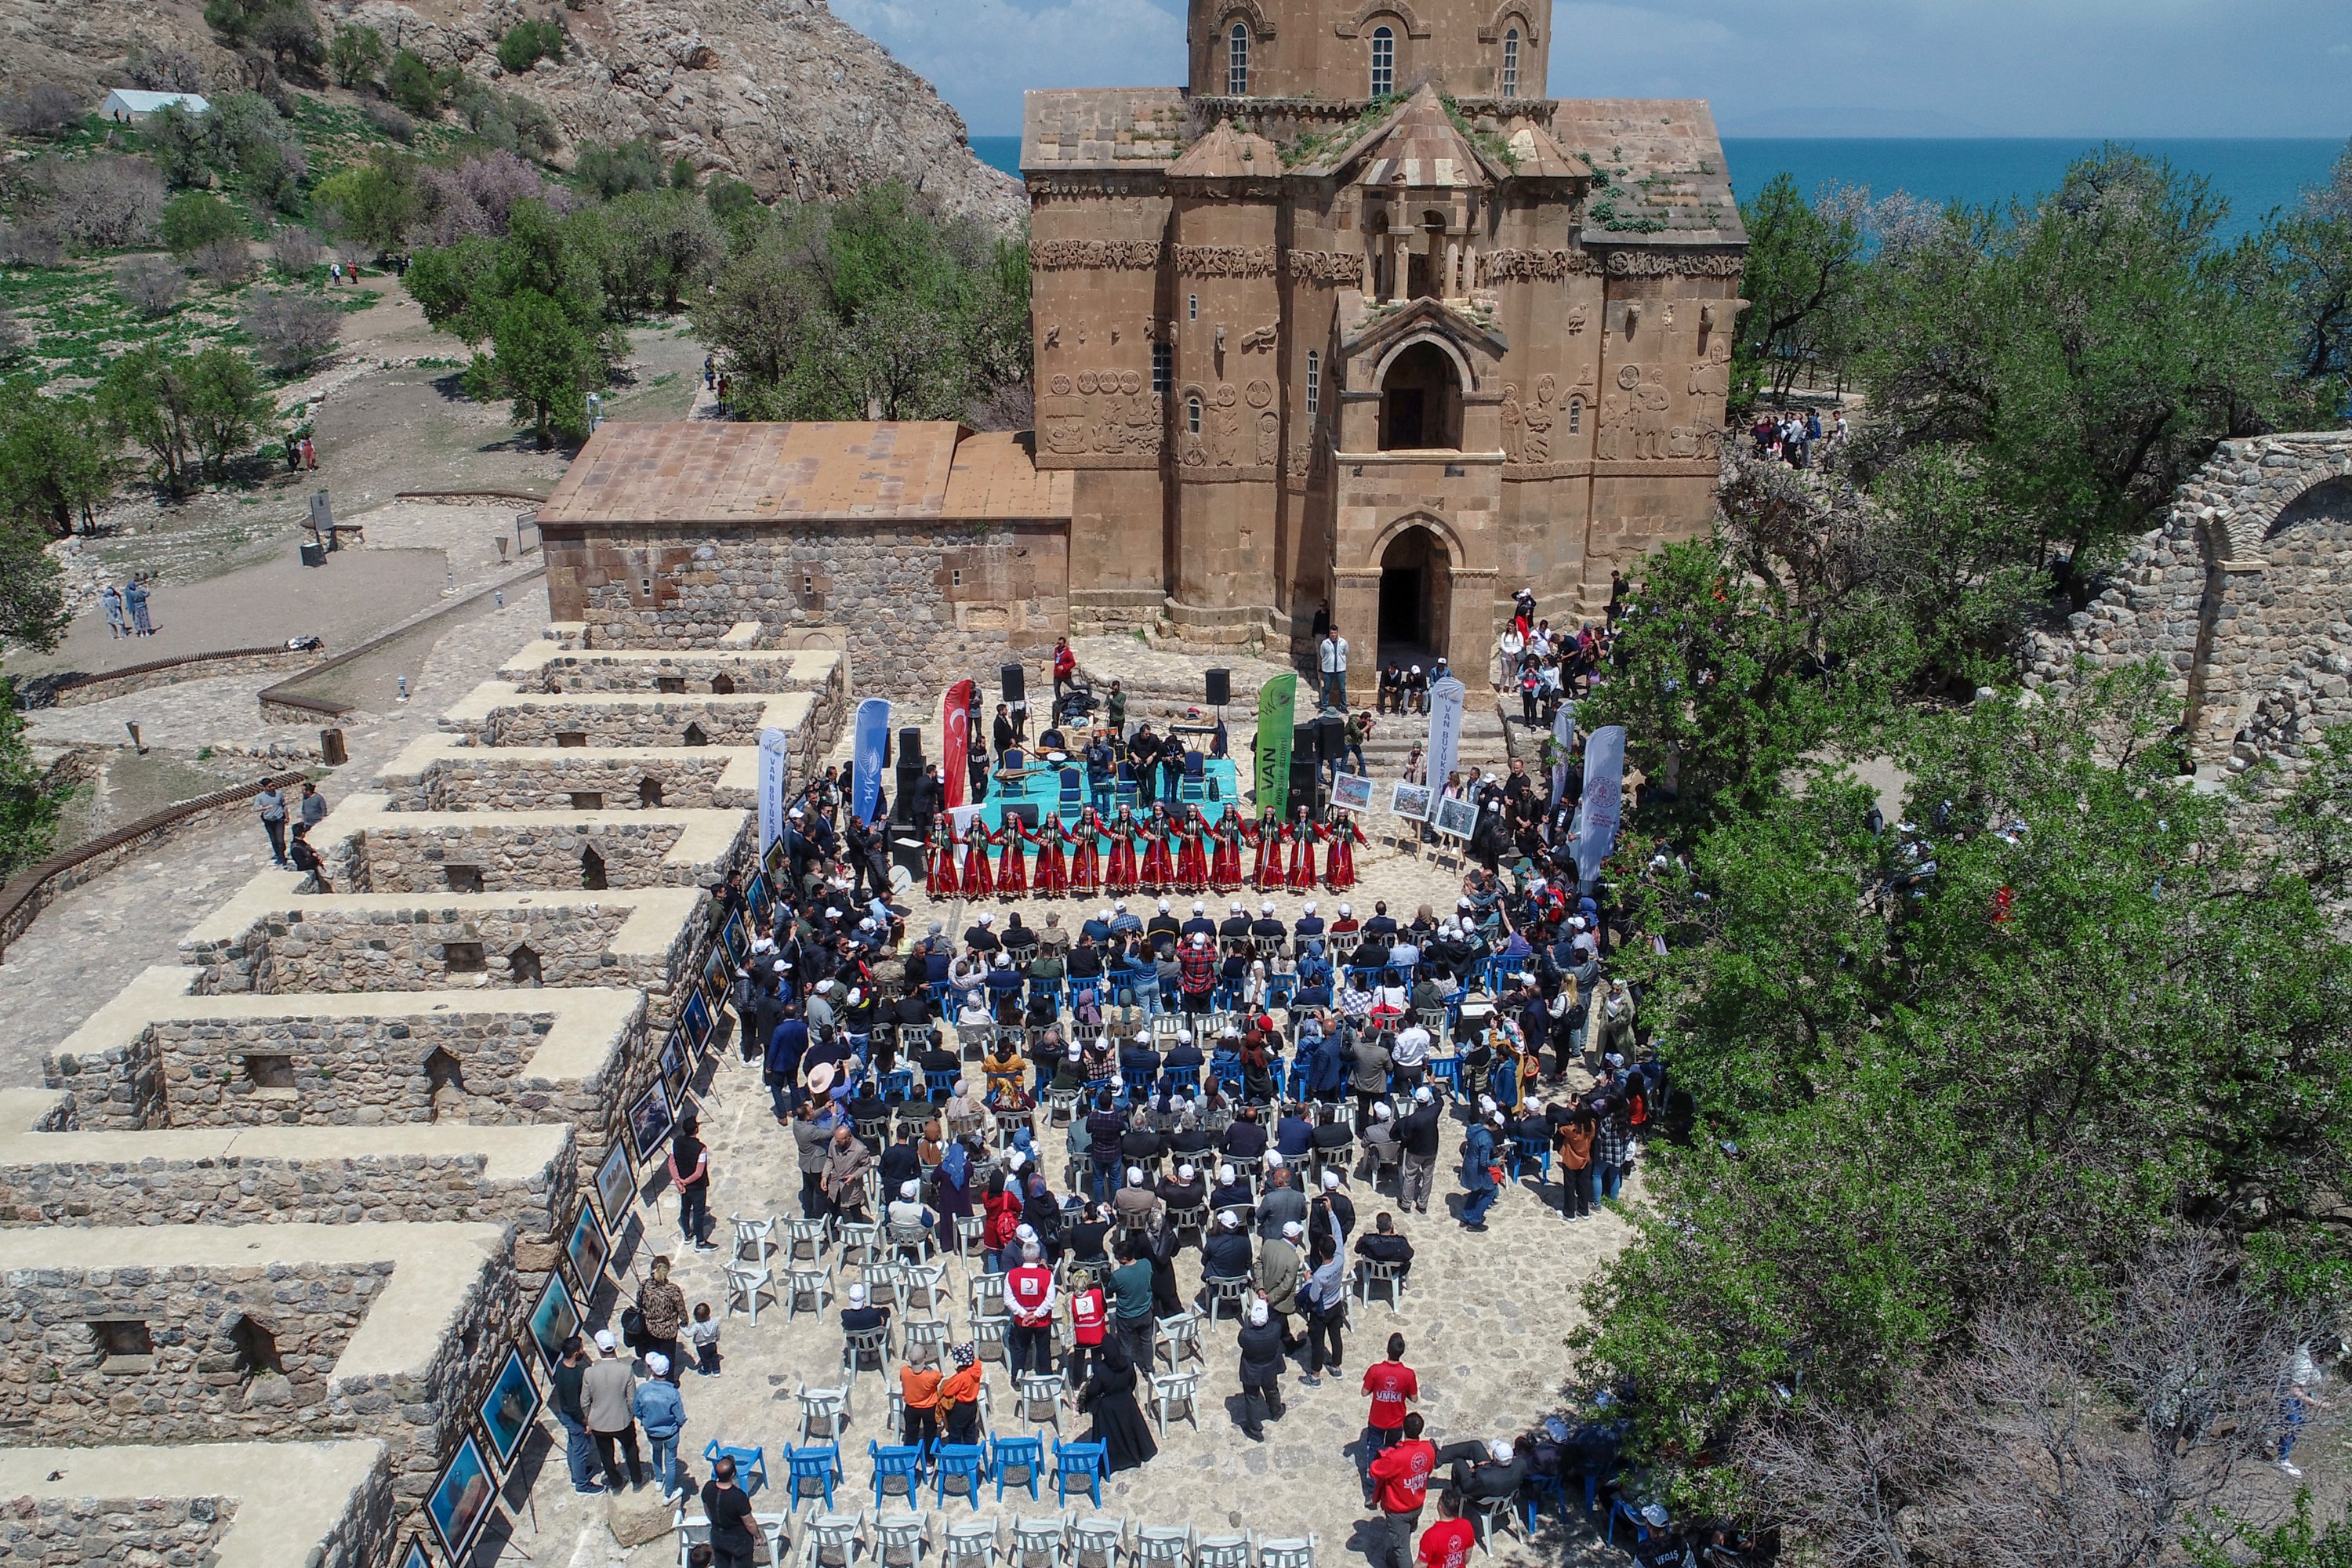 Organized by the Provincial Directorate of Culture and Tourism of Van on Akdamar Island in the Gevaş district of Van, the 